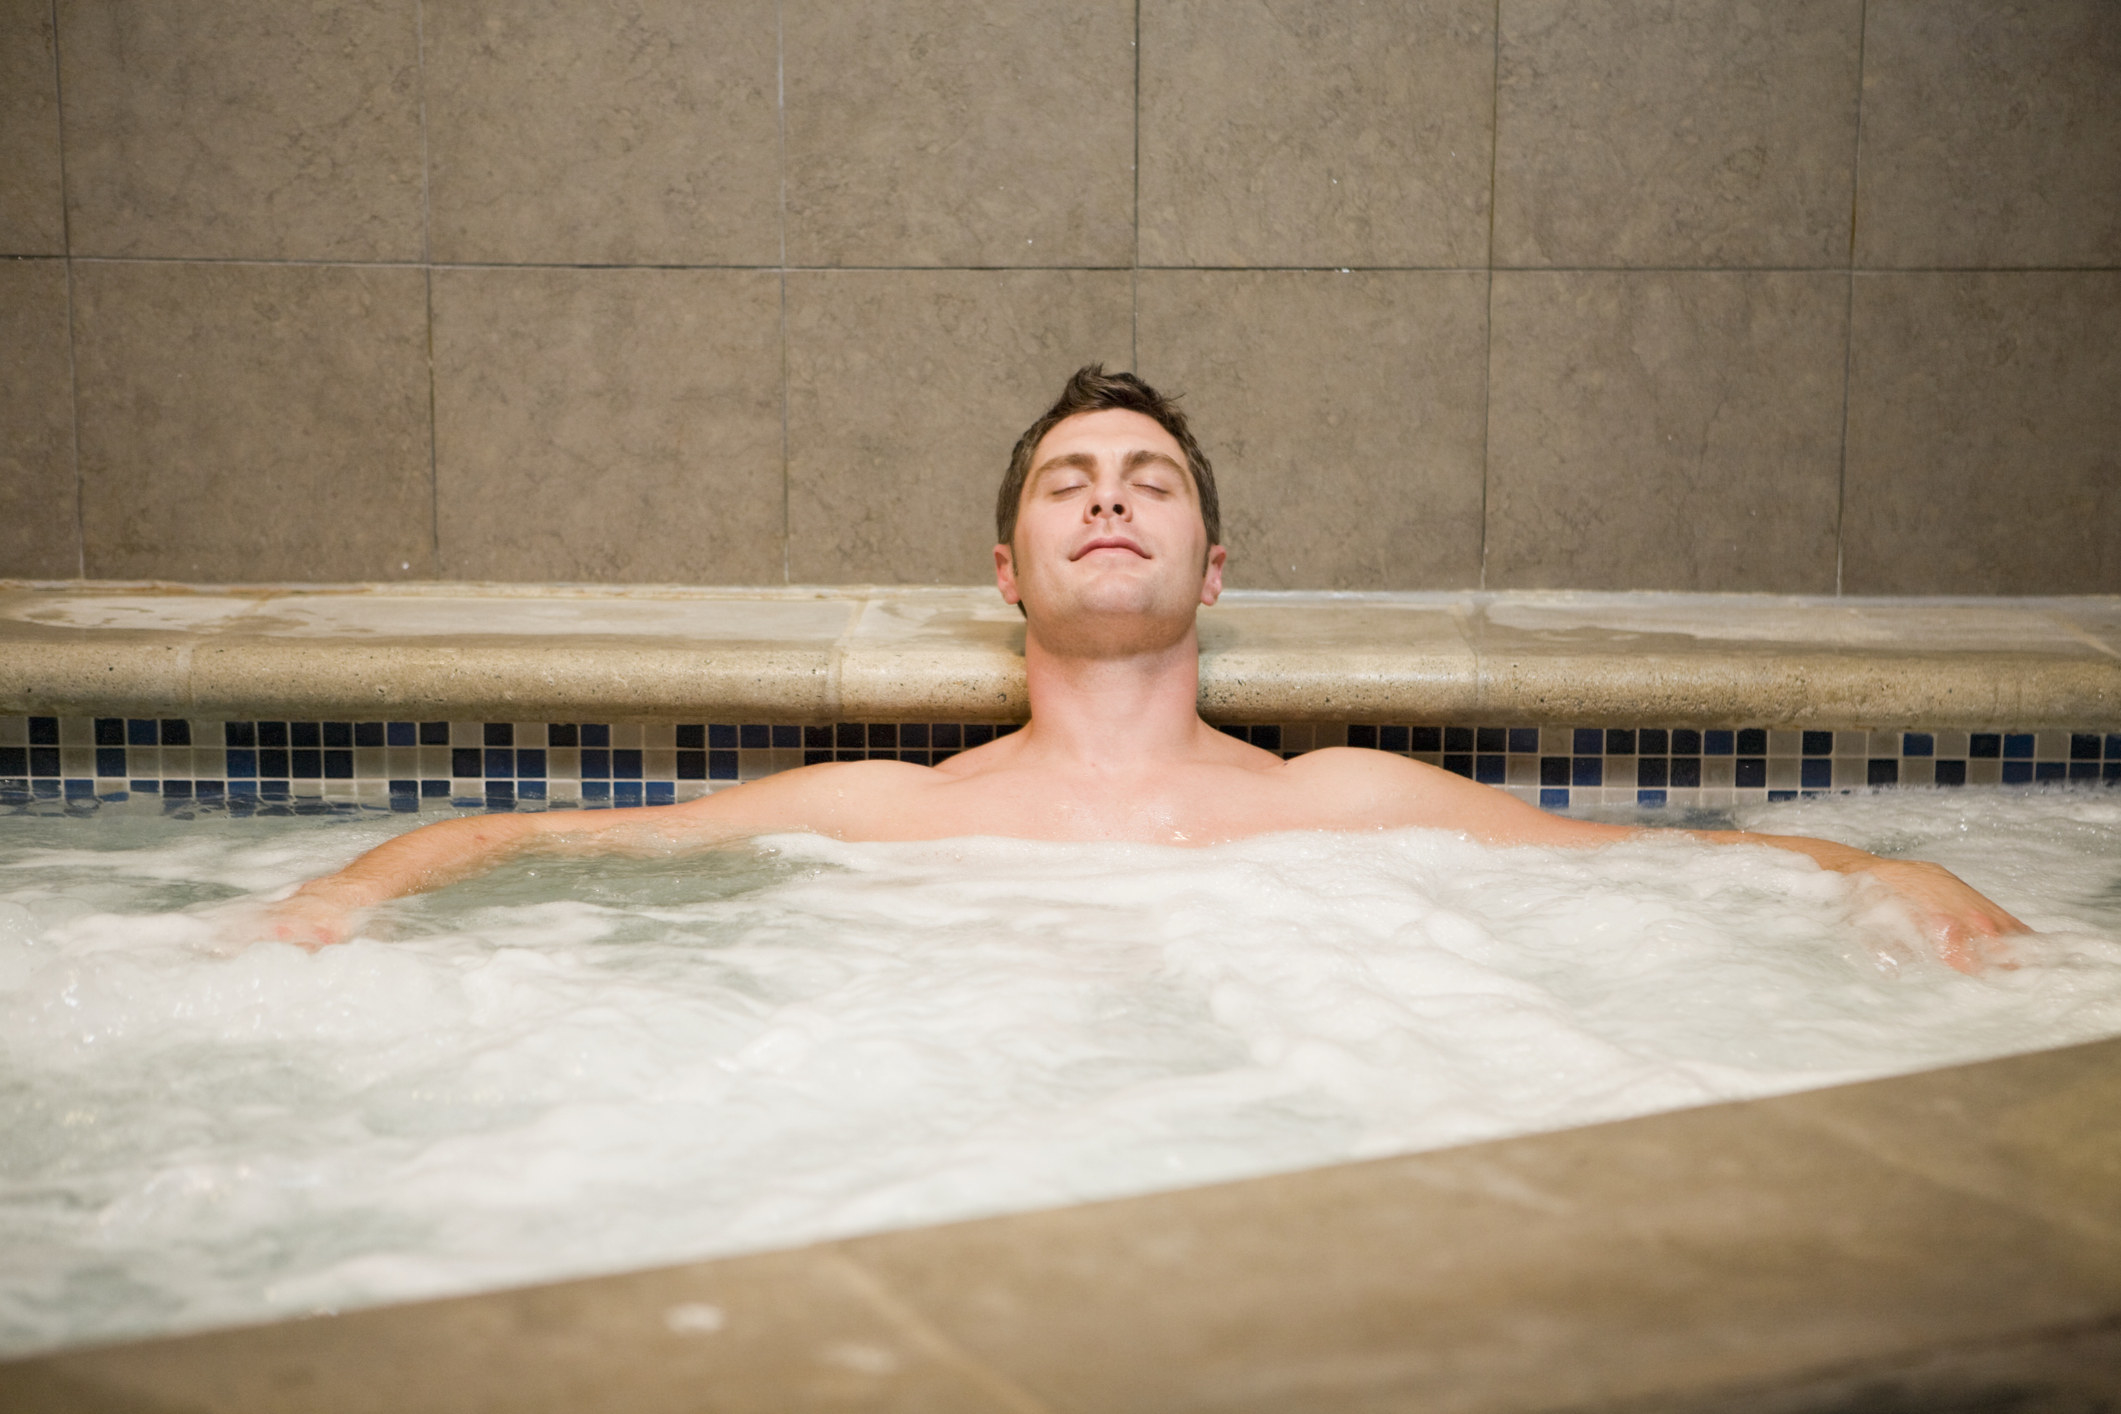 A stock image of a man sitting shirtless in a hot tub